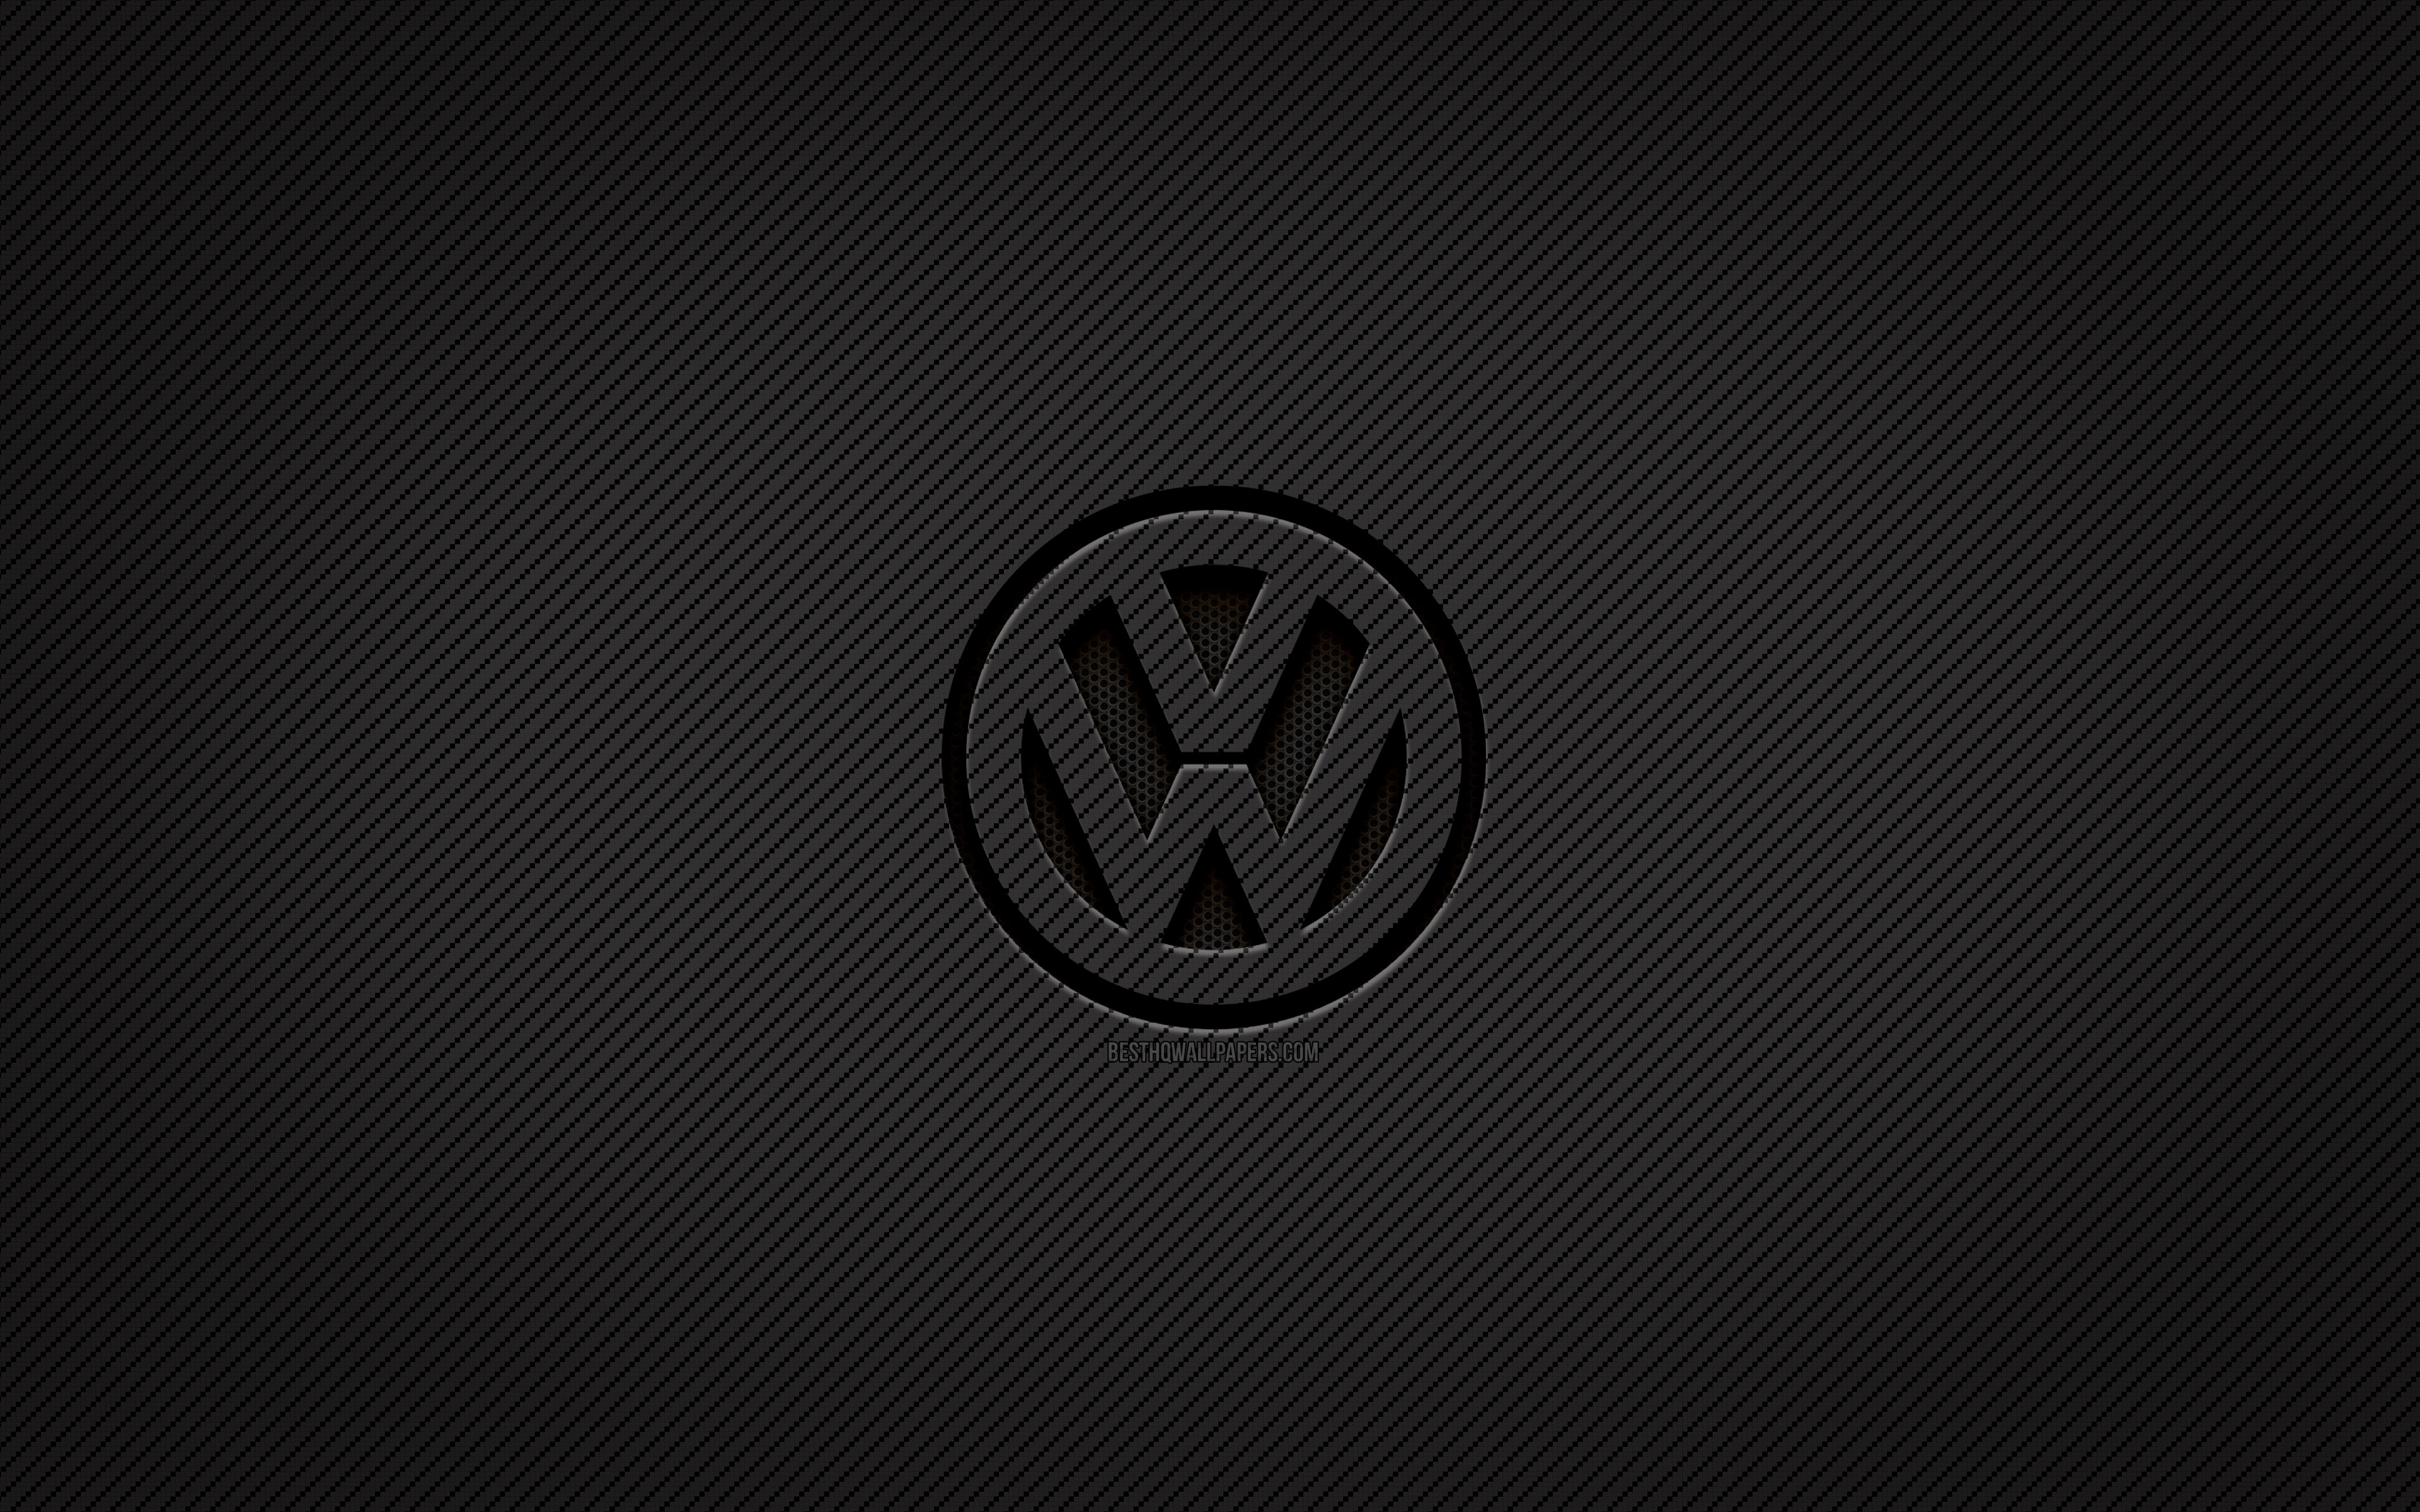 280 Volkswagen HD Wallpapers and Backgrounds